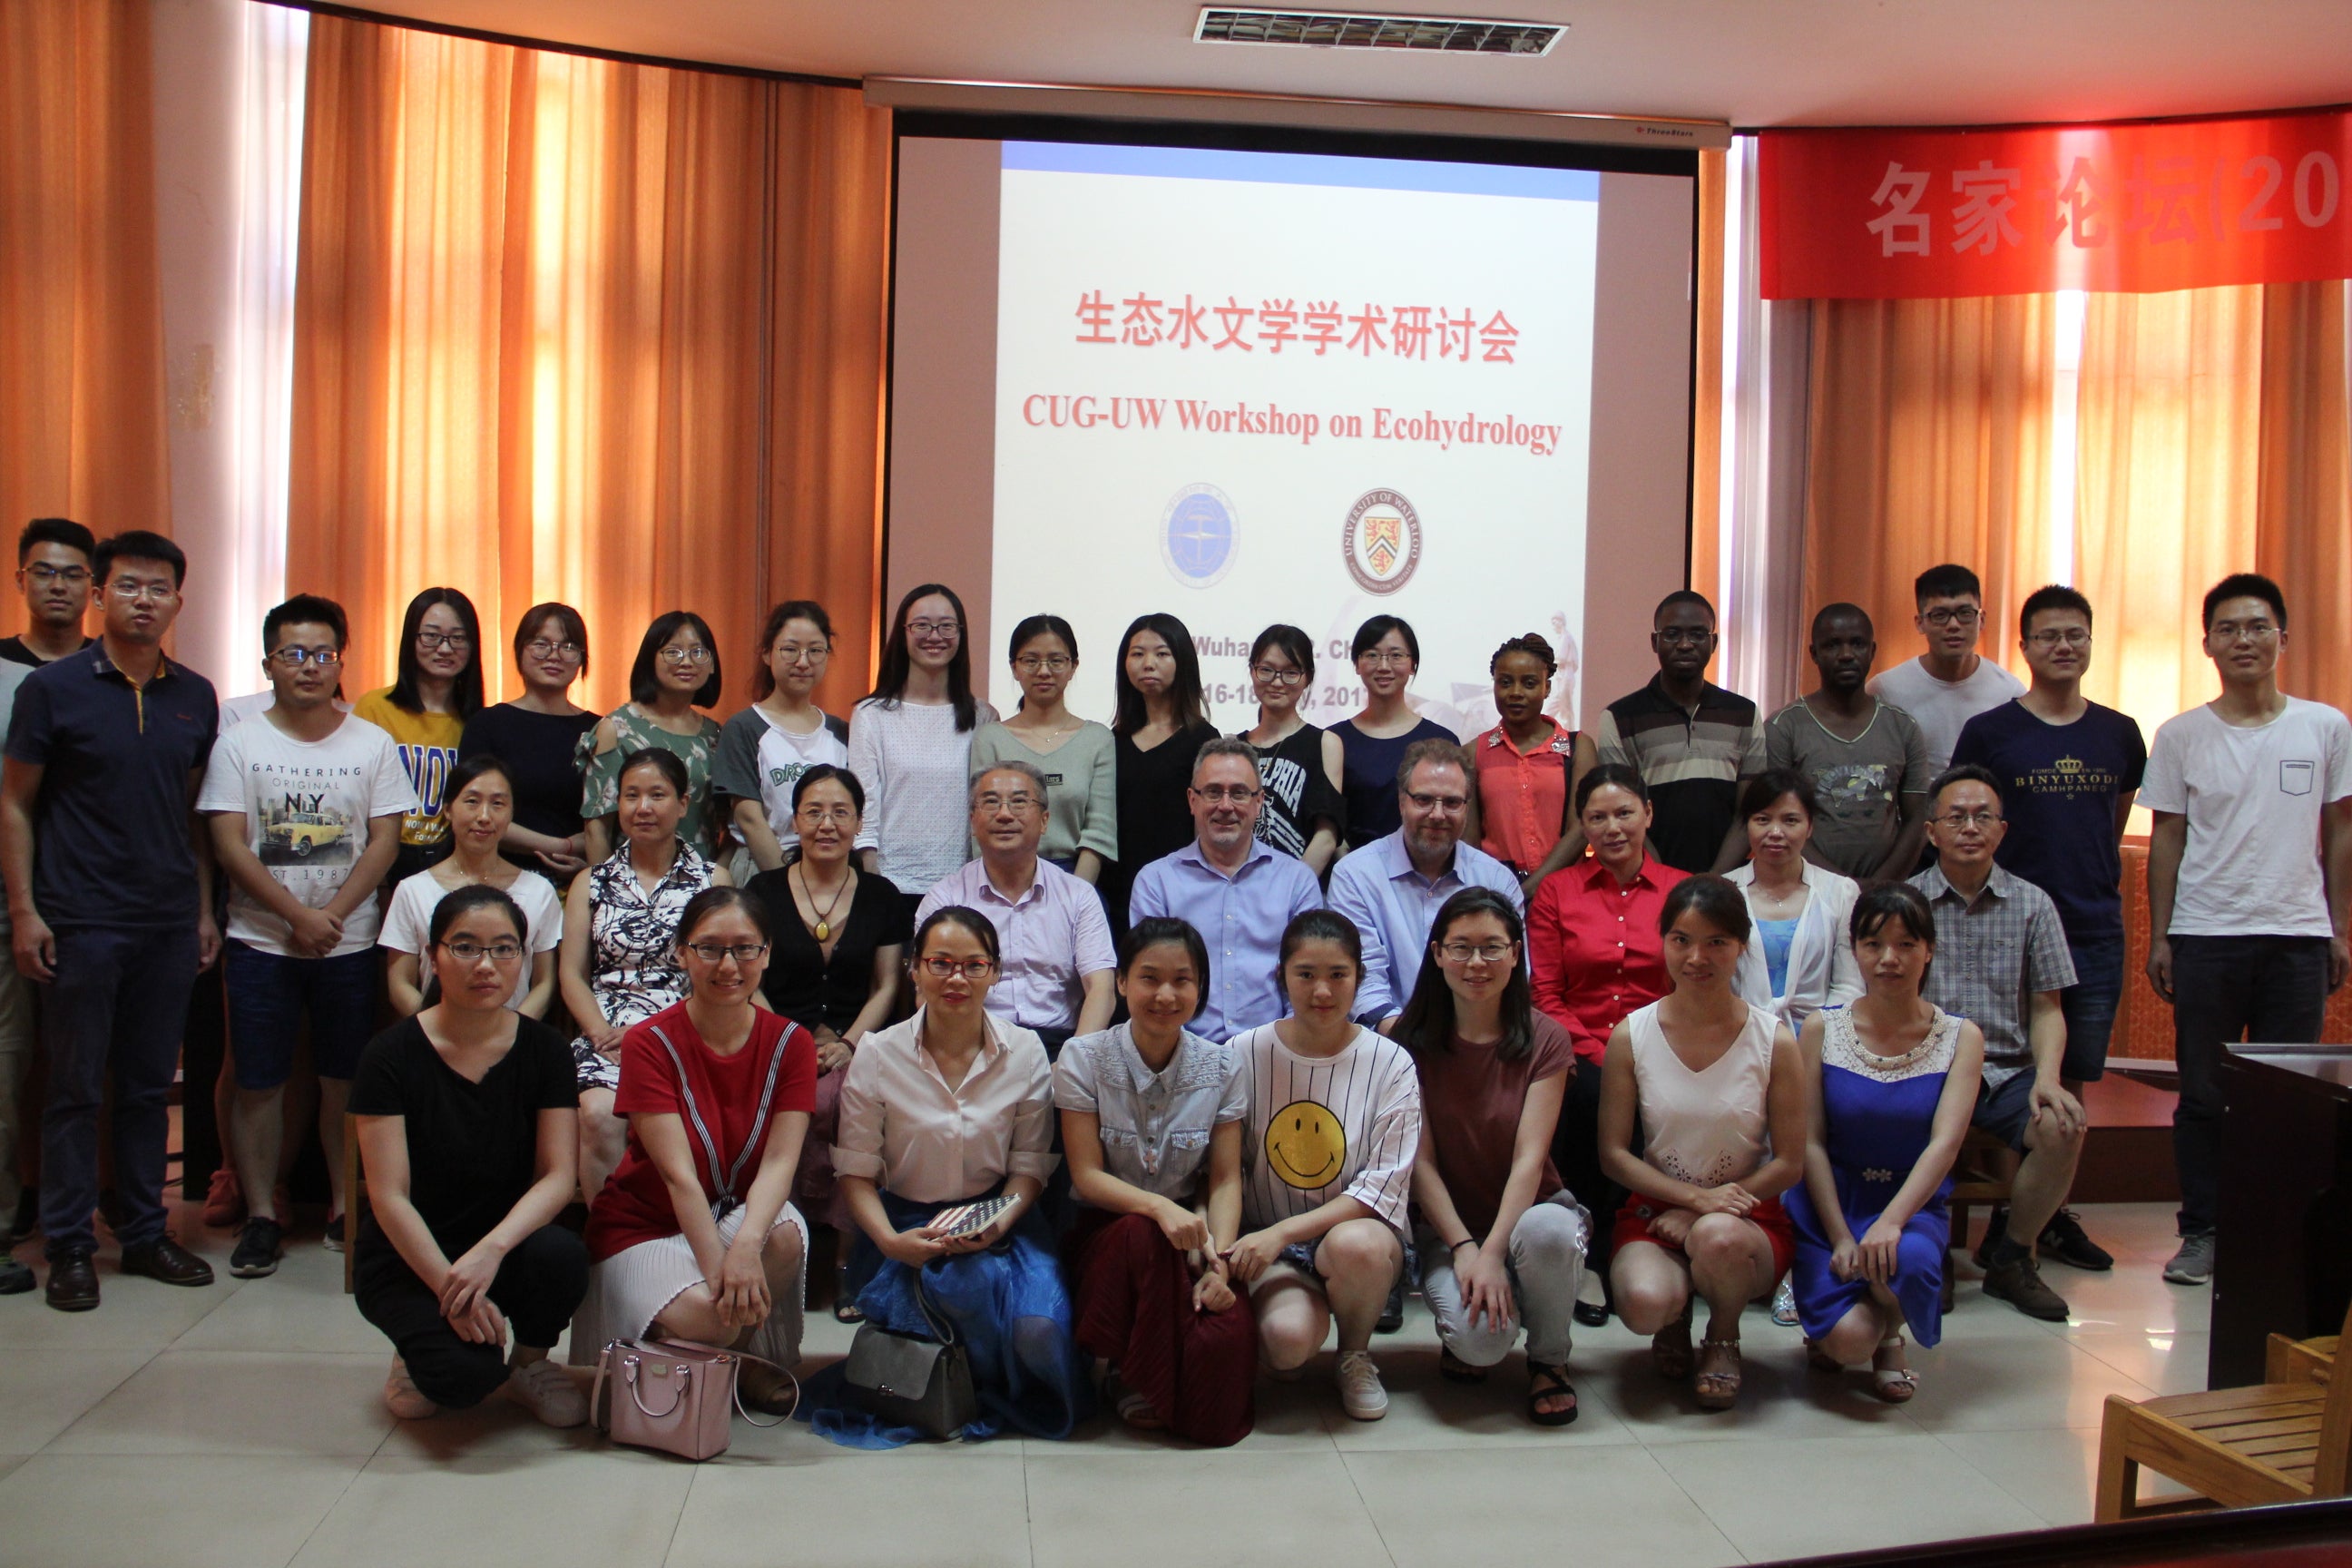 Attendees of the CUG-UW Workshop on Ecohydrology in Wuhan, China